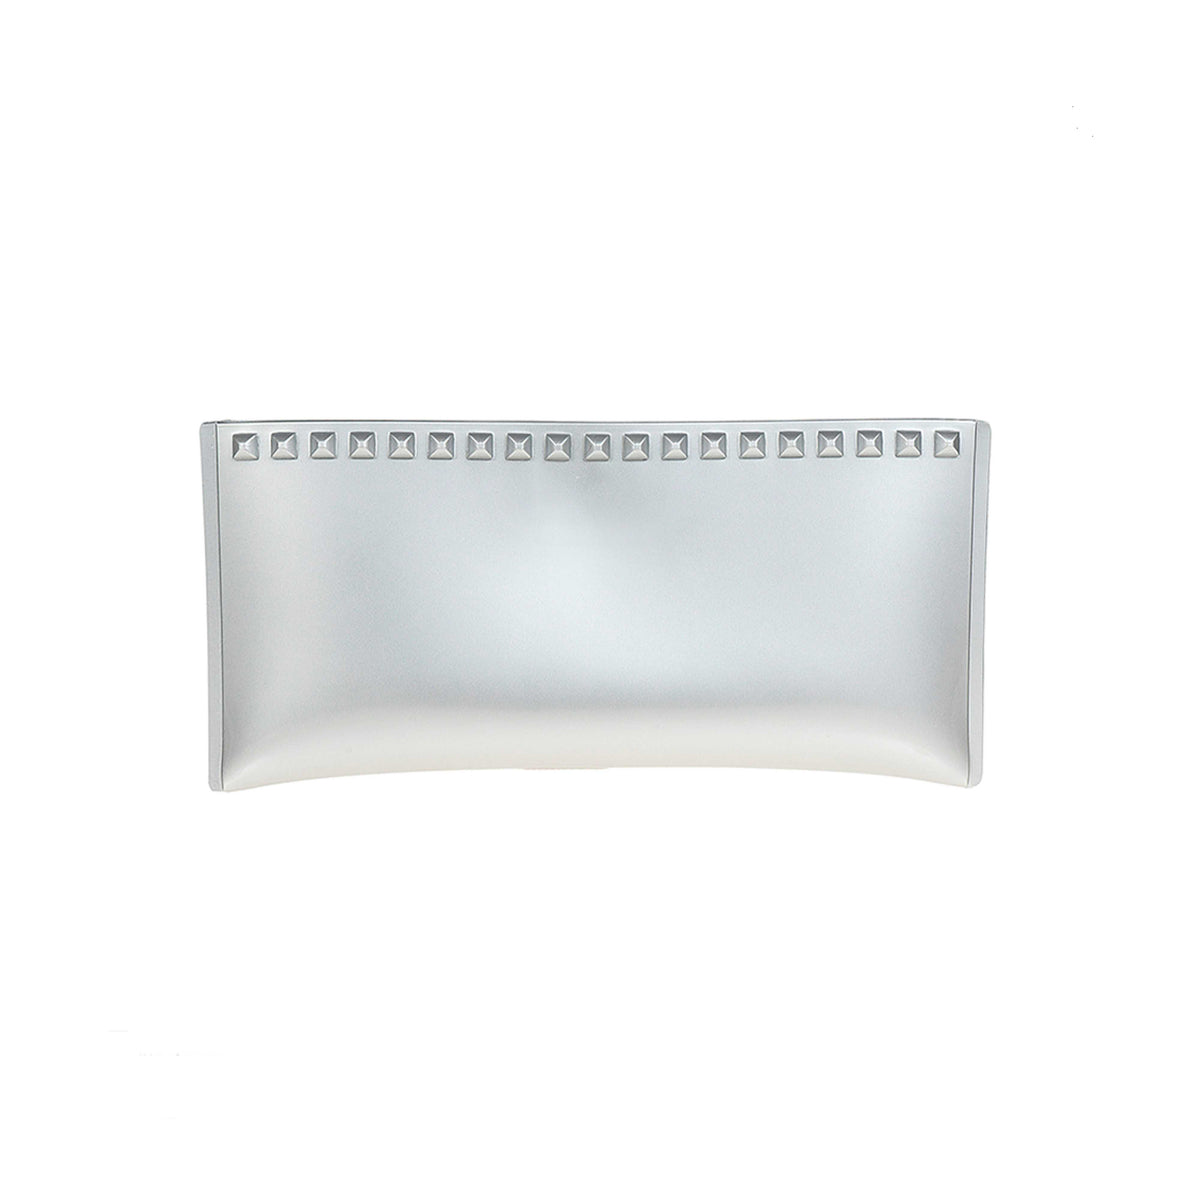 Silver Carmen Sol studded purse for the pool